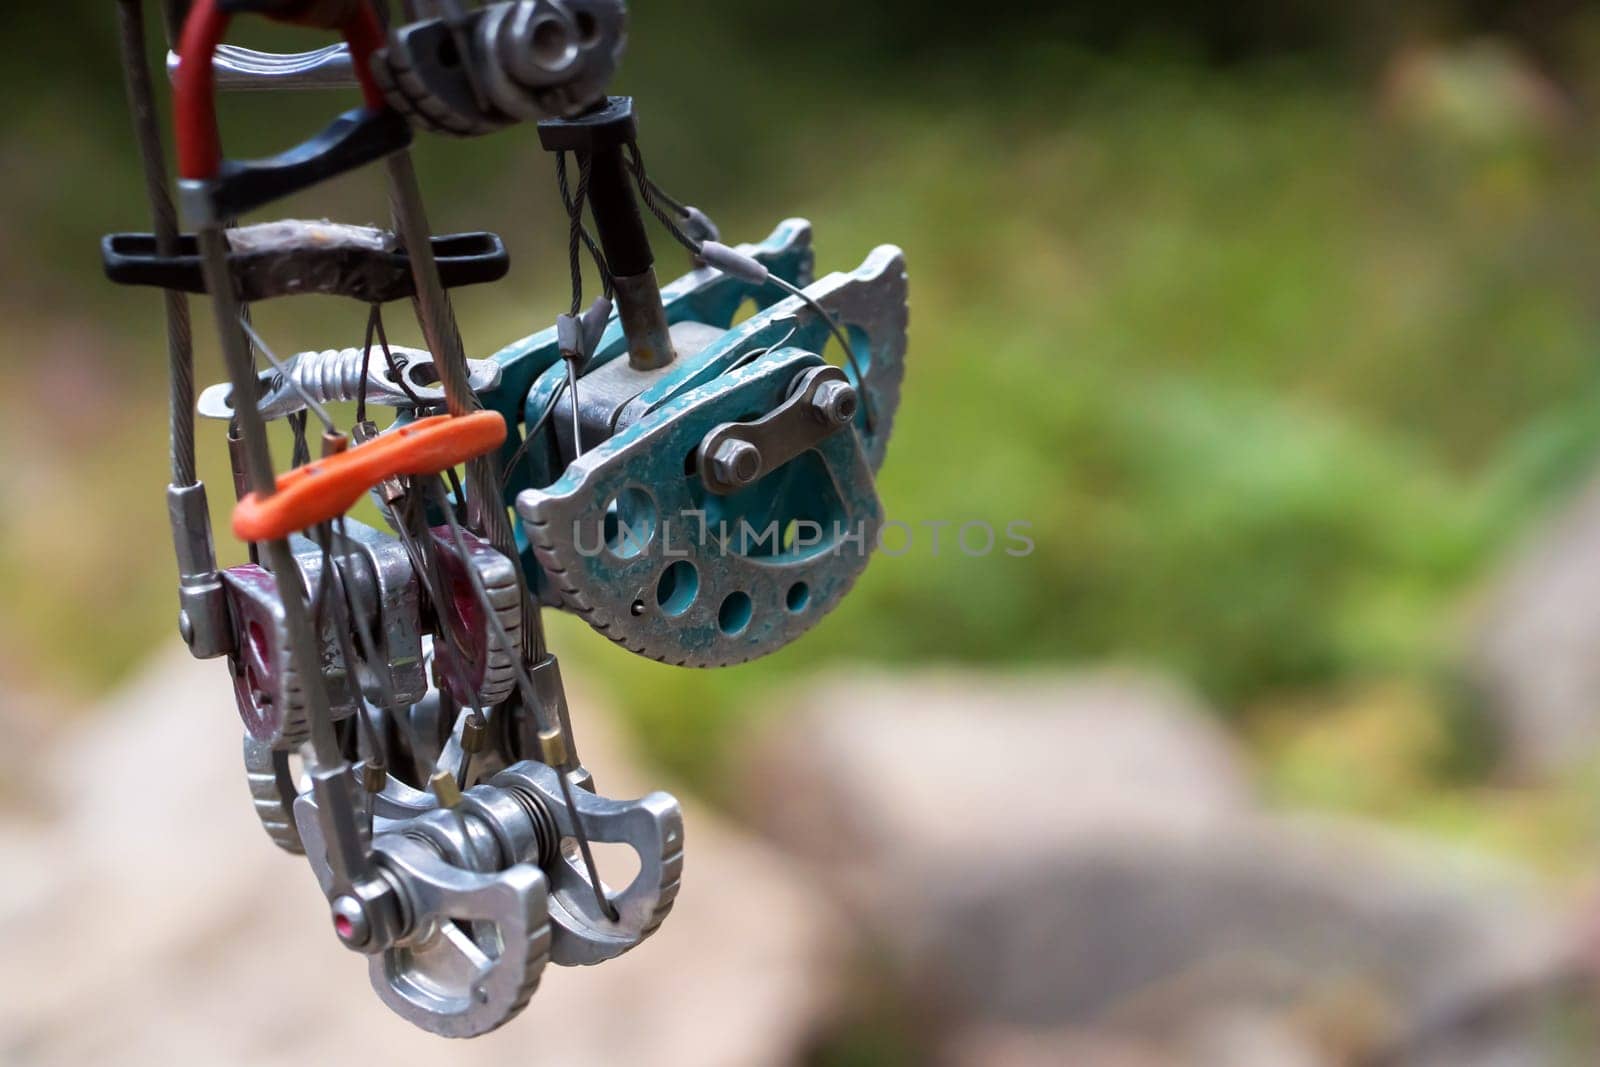 Climbing gear, mountaineering tools such as vintage rugged cams.